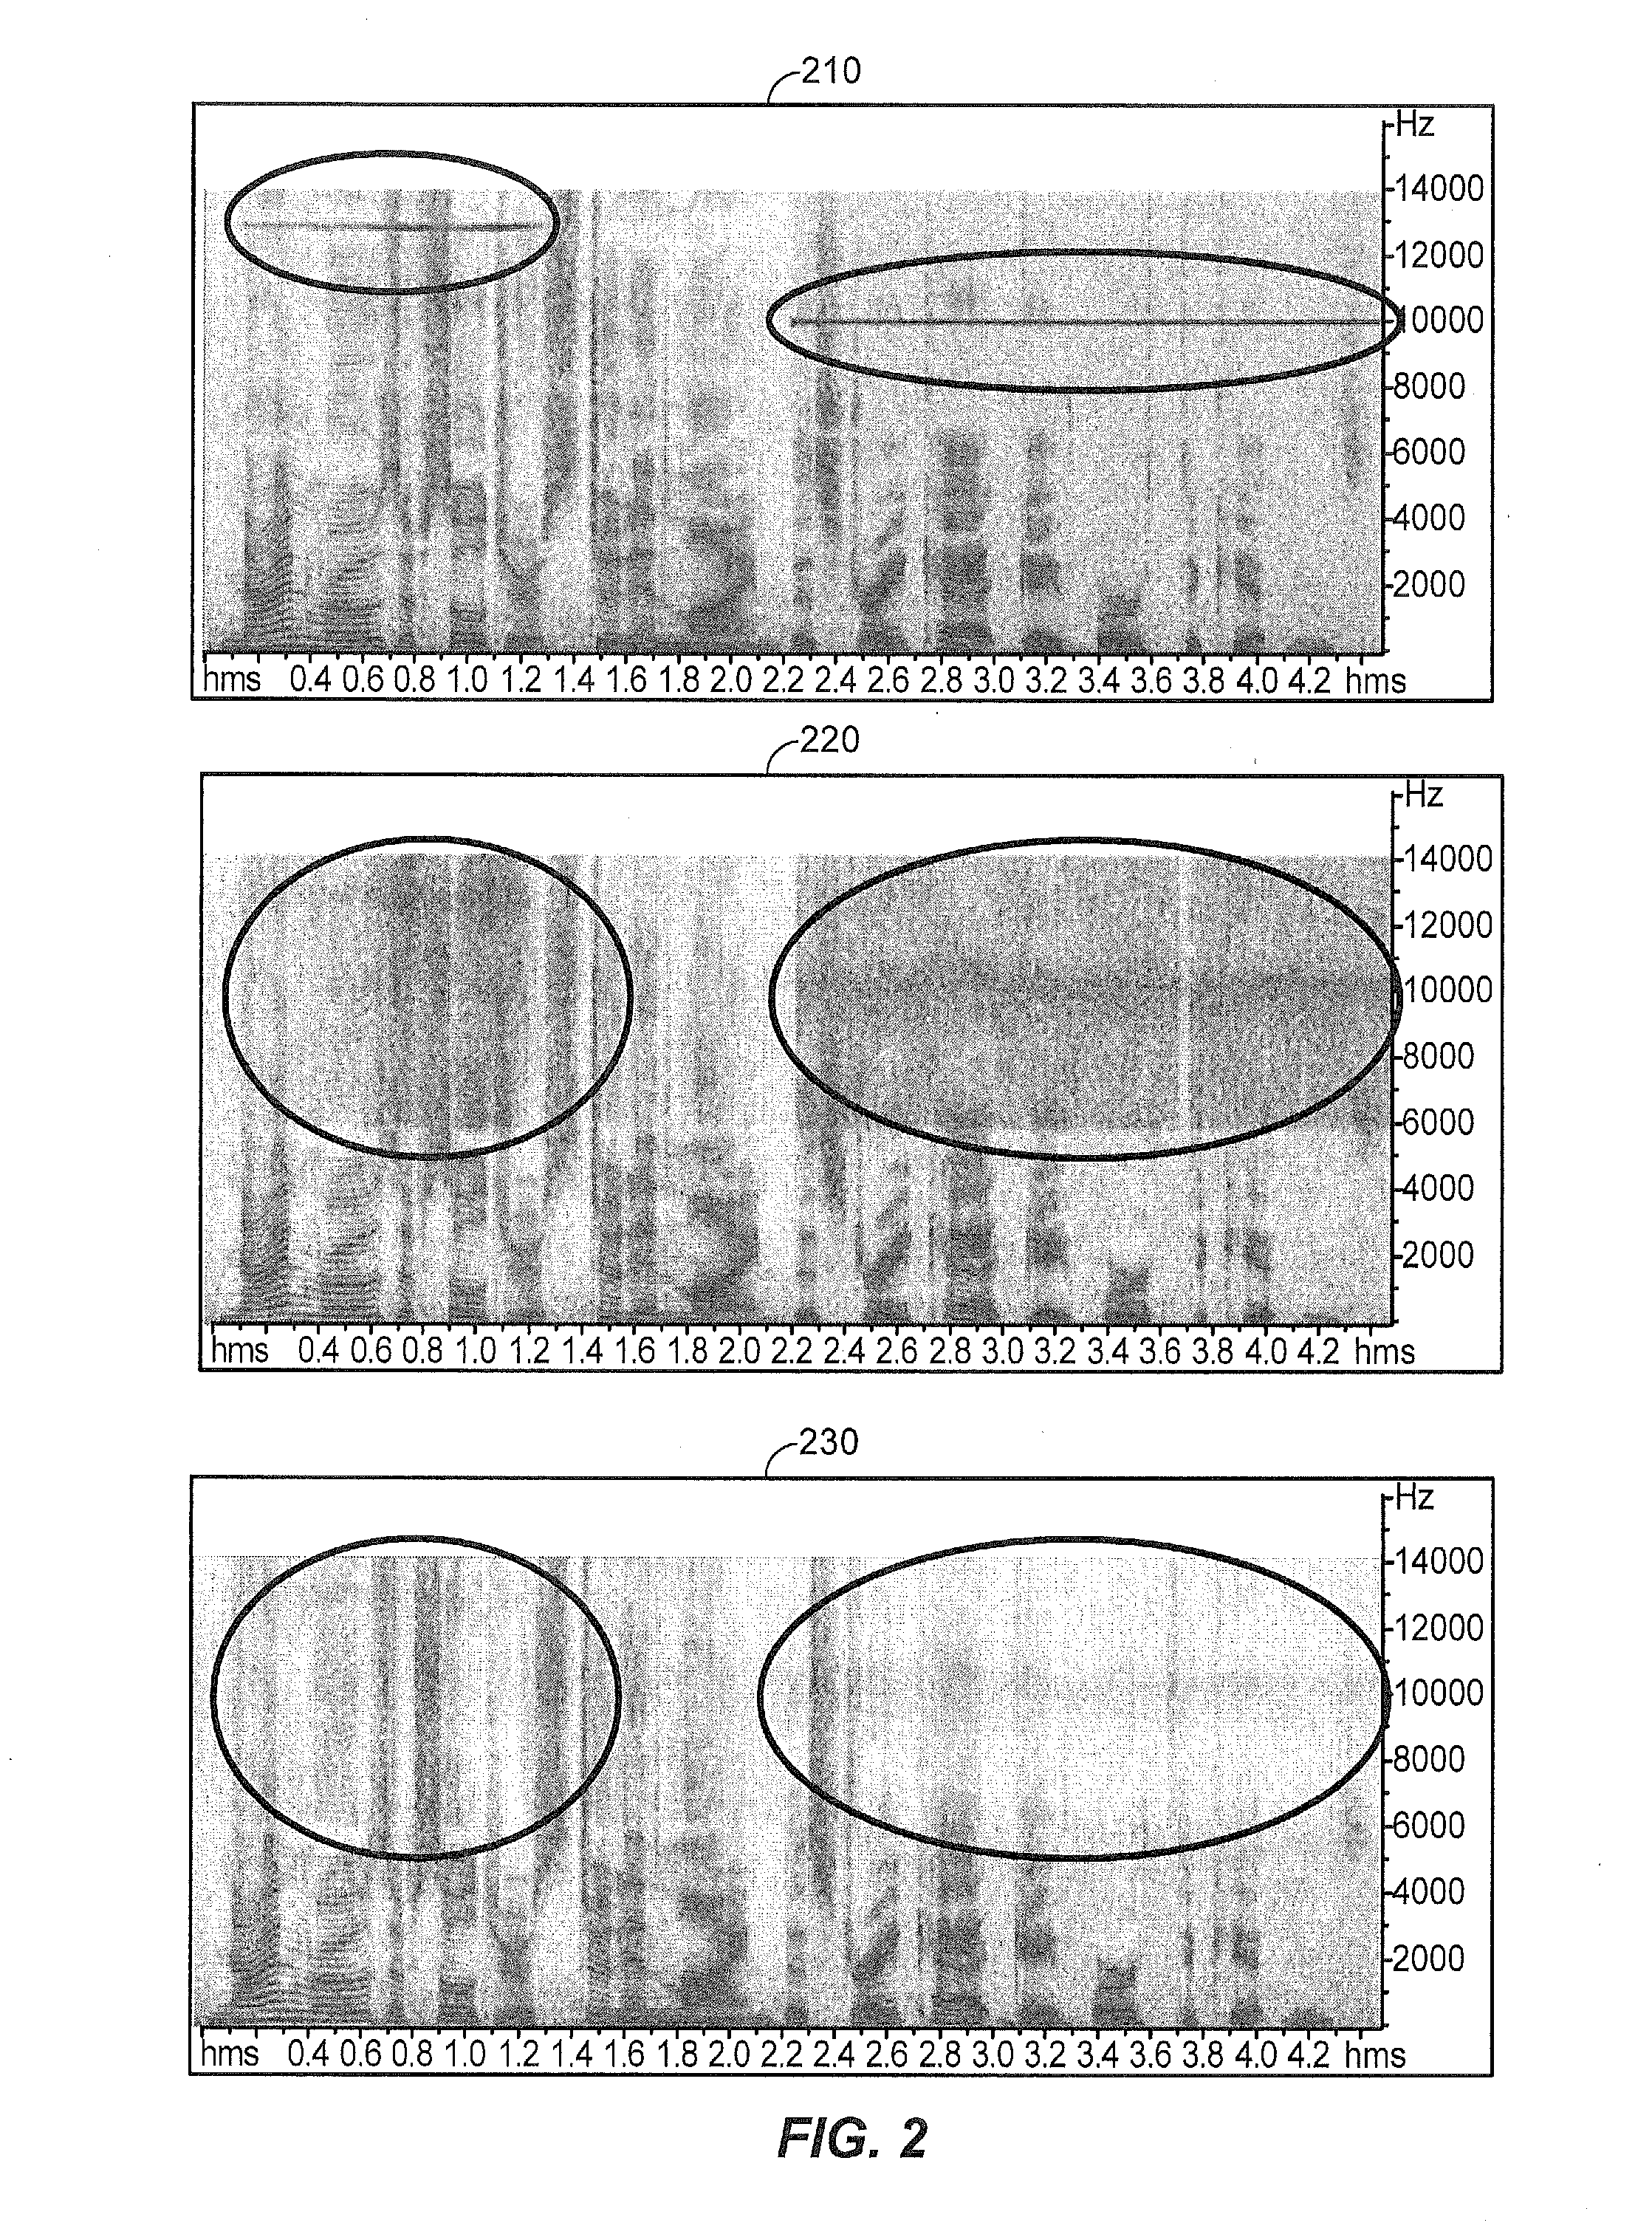 Systems and Methods of Performing Gain Control